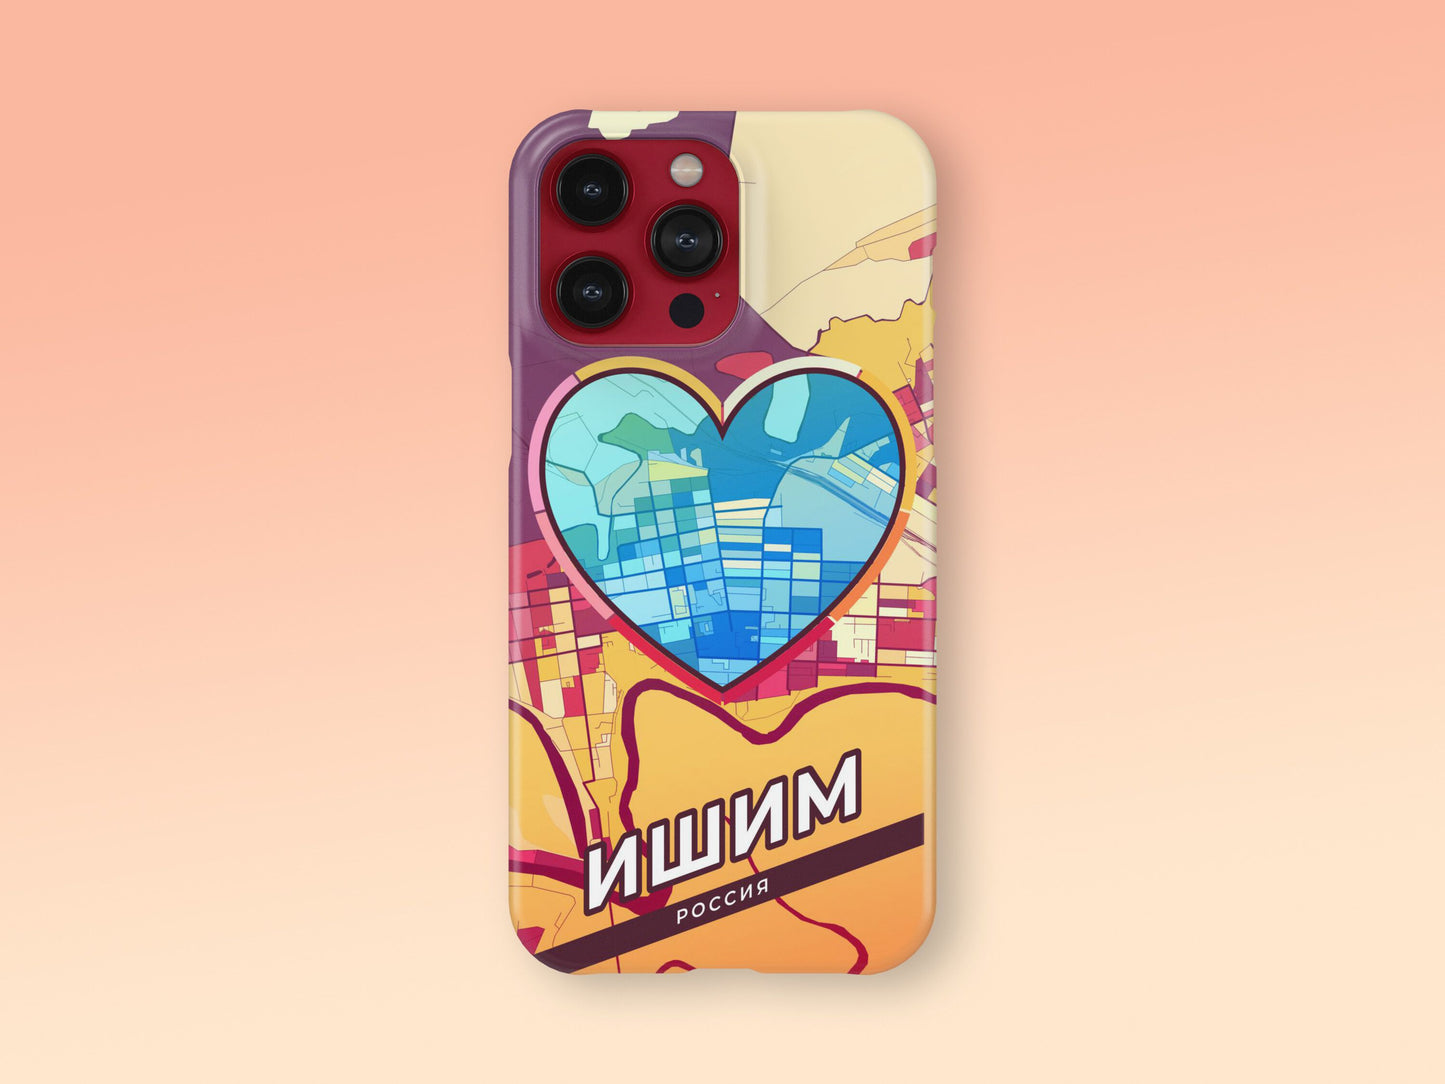 Ishim Russia slim phone case with colorful icon. Birthday, wedding or housewarming gift. Couple match cases. 2